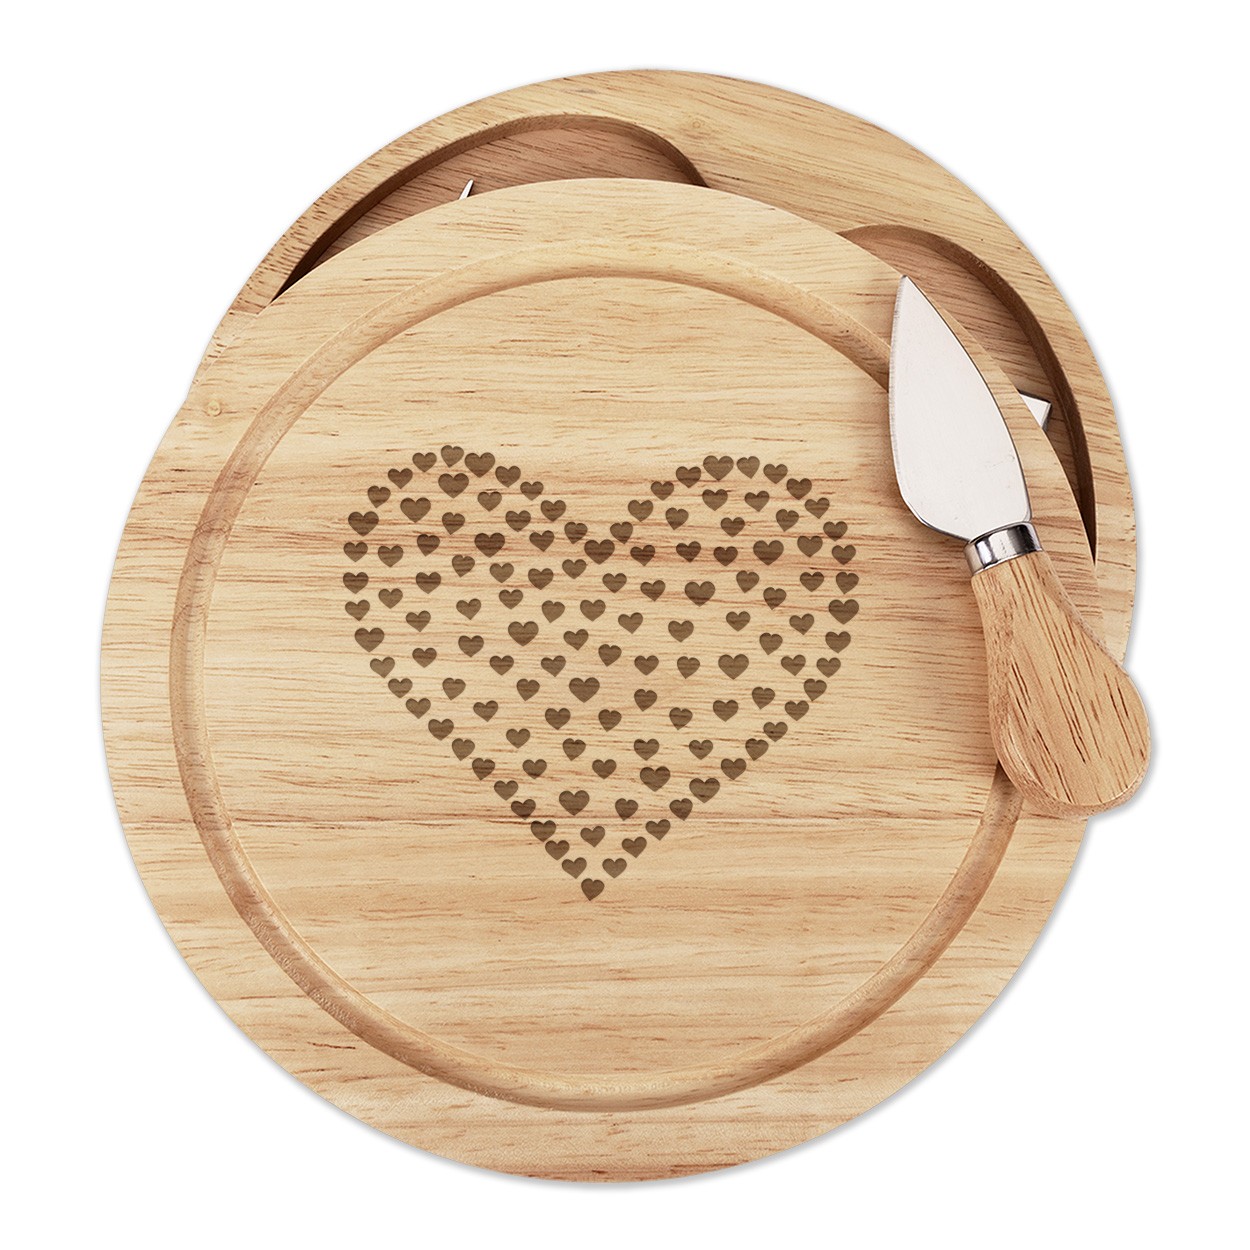 Heart Of Hearts Wooden Cheese Board Set 4 Knives